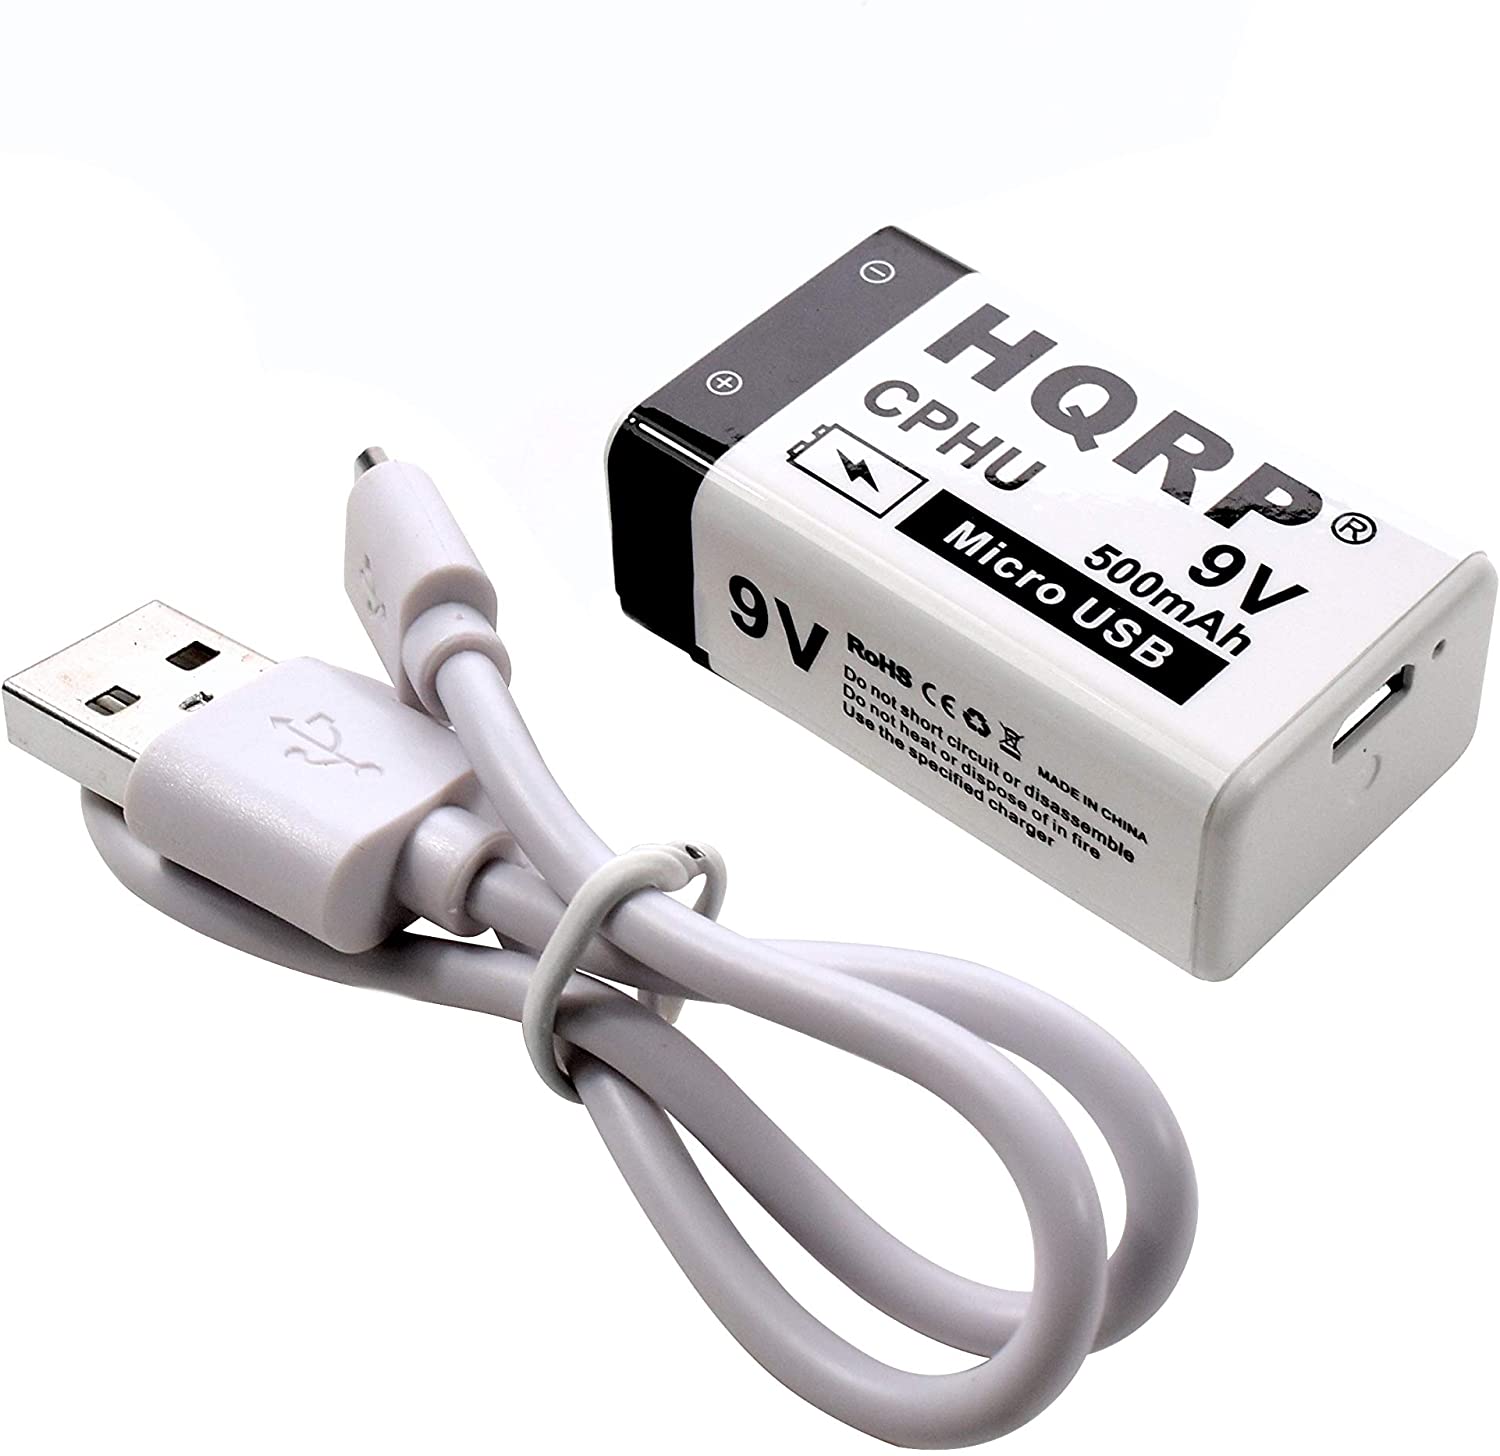 HQRP USB 9V Lithium-Ion Rechargeable Battery, High Capacity 500mAh 9-Volt, 1.5 H Fast Charge, 800 Cycle with Micro USB Cable, Radio Square 6LR61 7.2H5 6KR61 6HR61 PP3 MN1604 - image 3 of 8